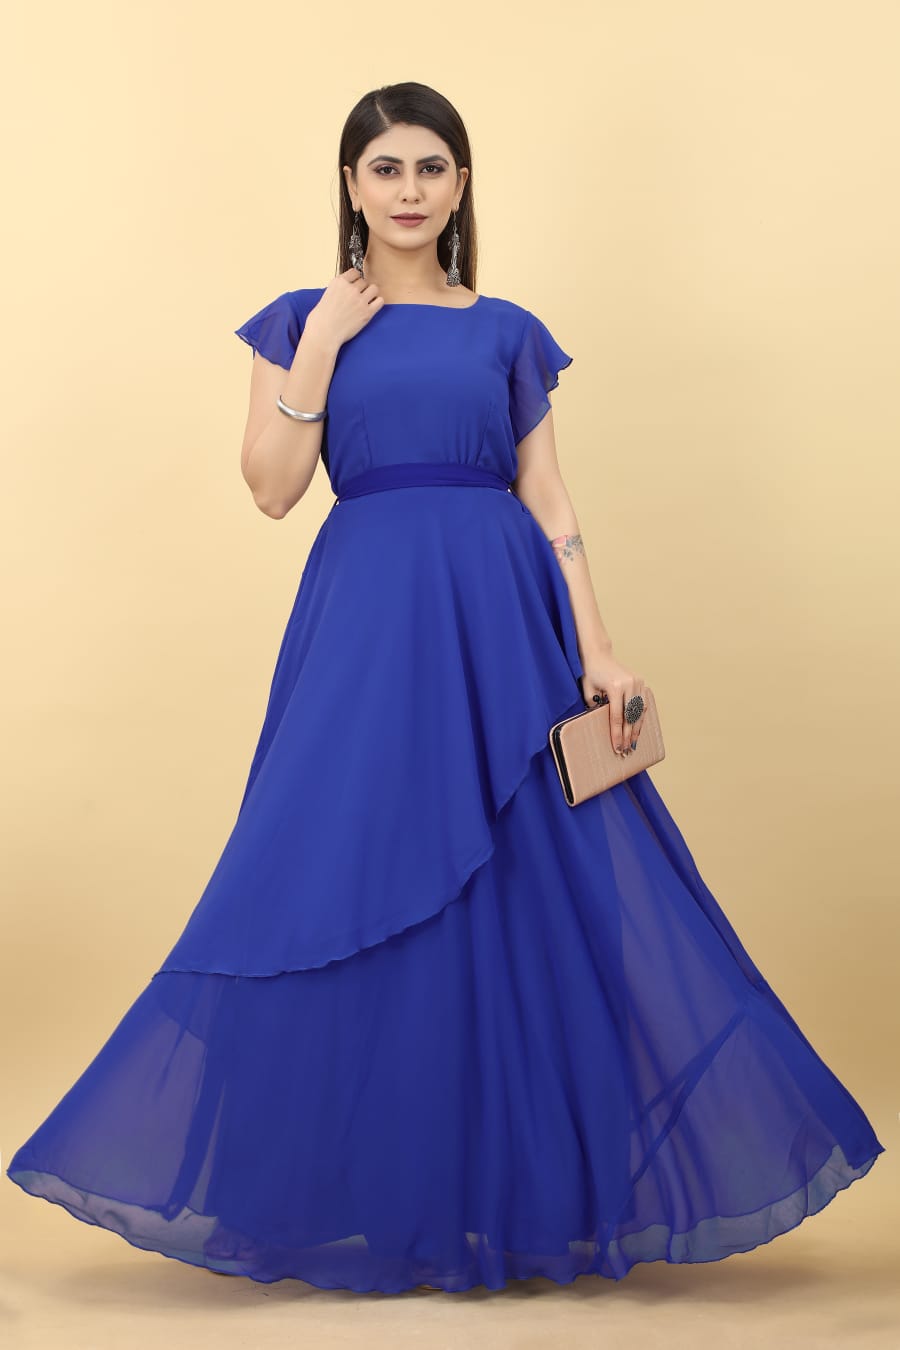 Buy Blue Designer Party Wear Gown for Girls | Gowns